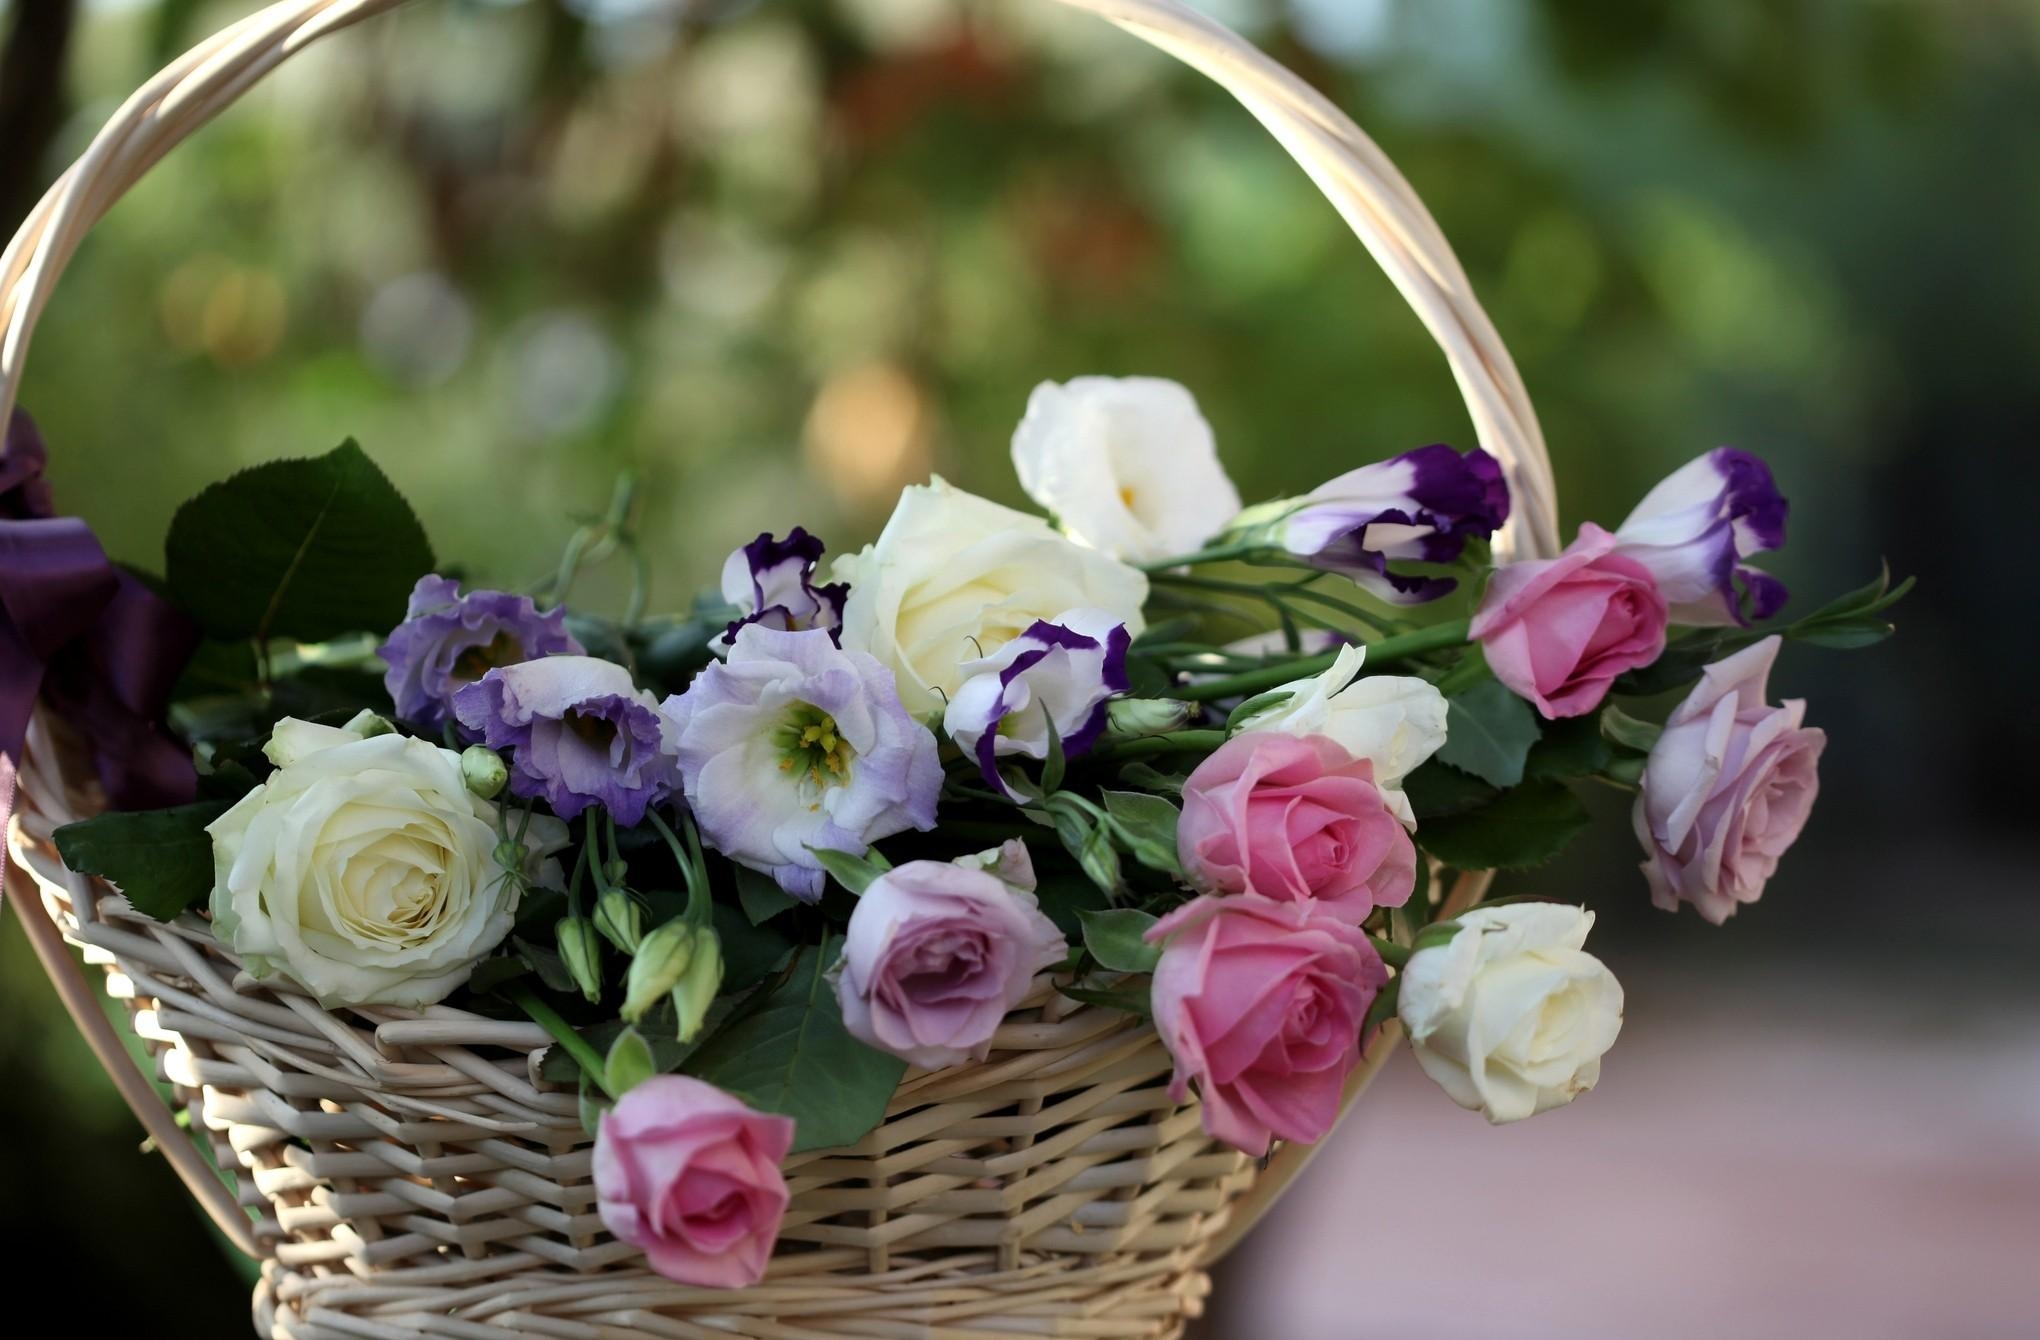 roses, flowers, blur, smooth, basket, lisianthus russell, lisiantus russell